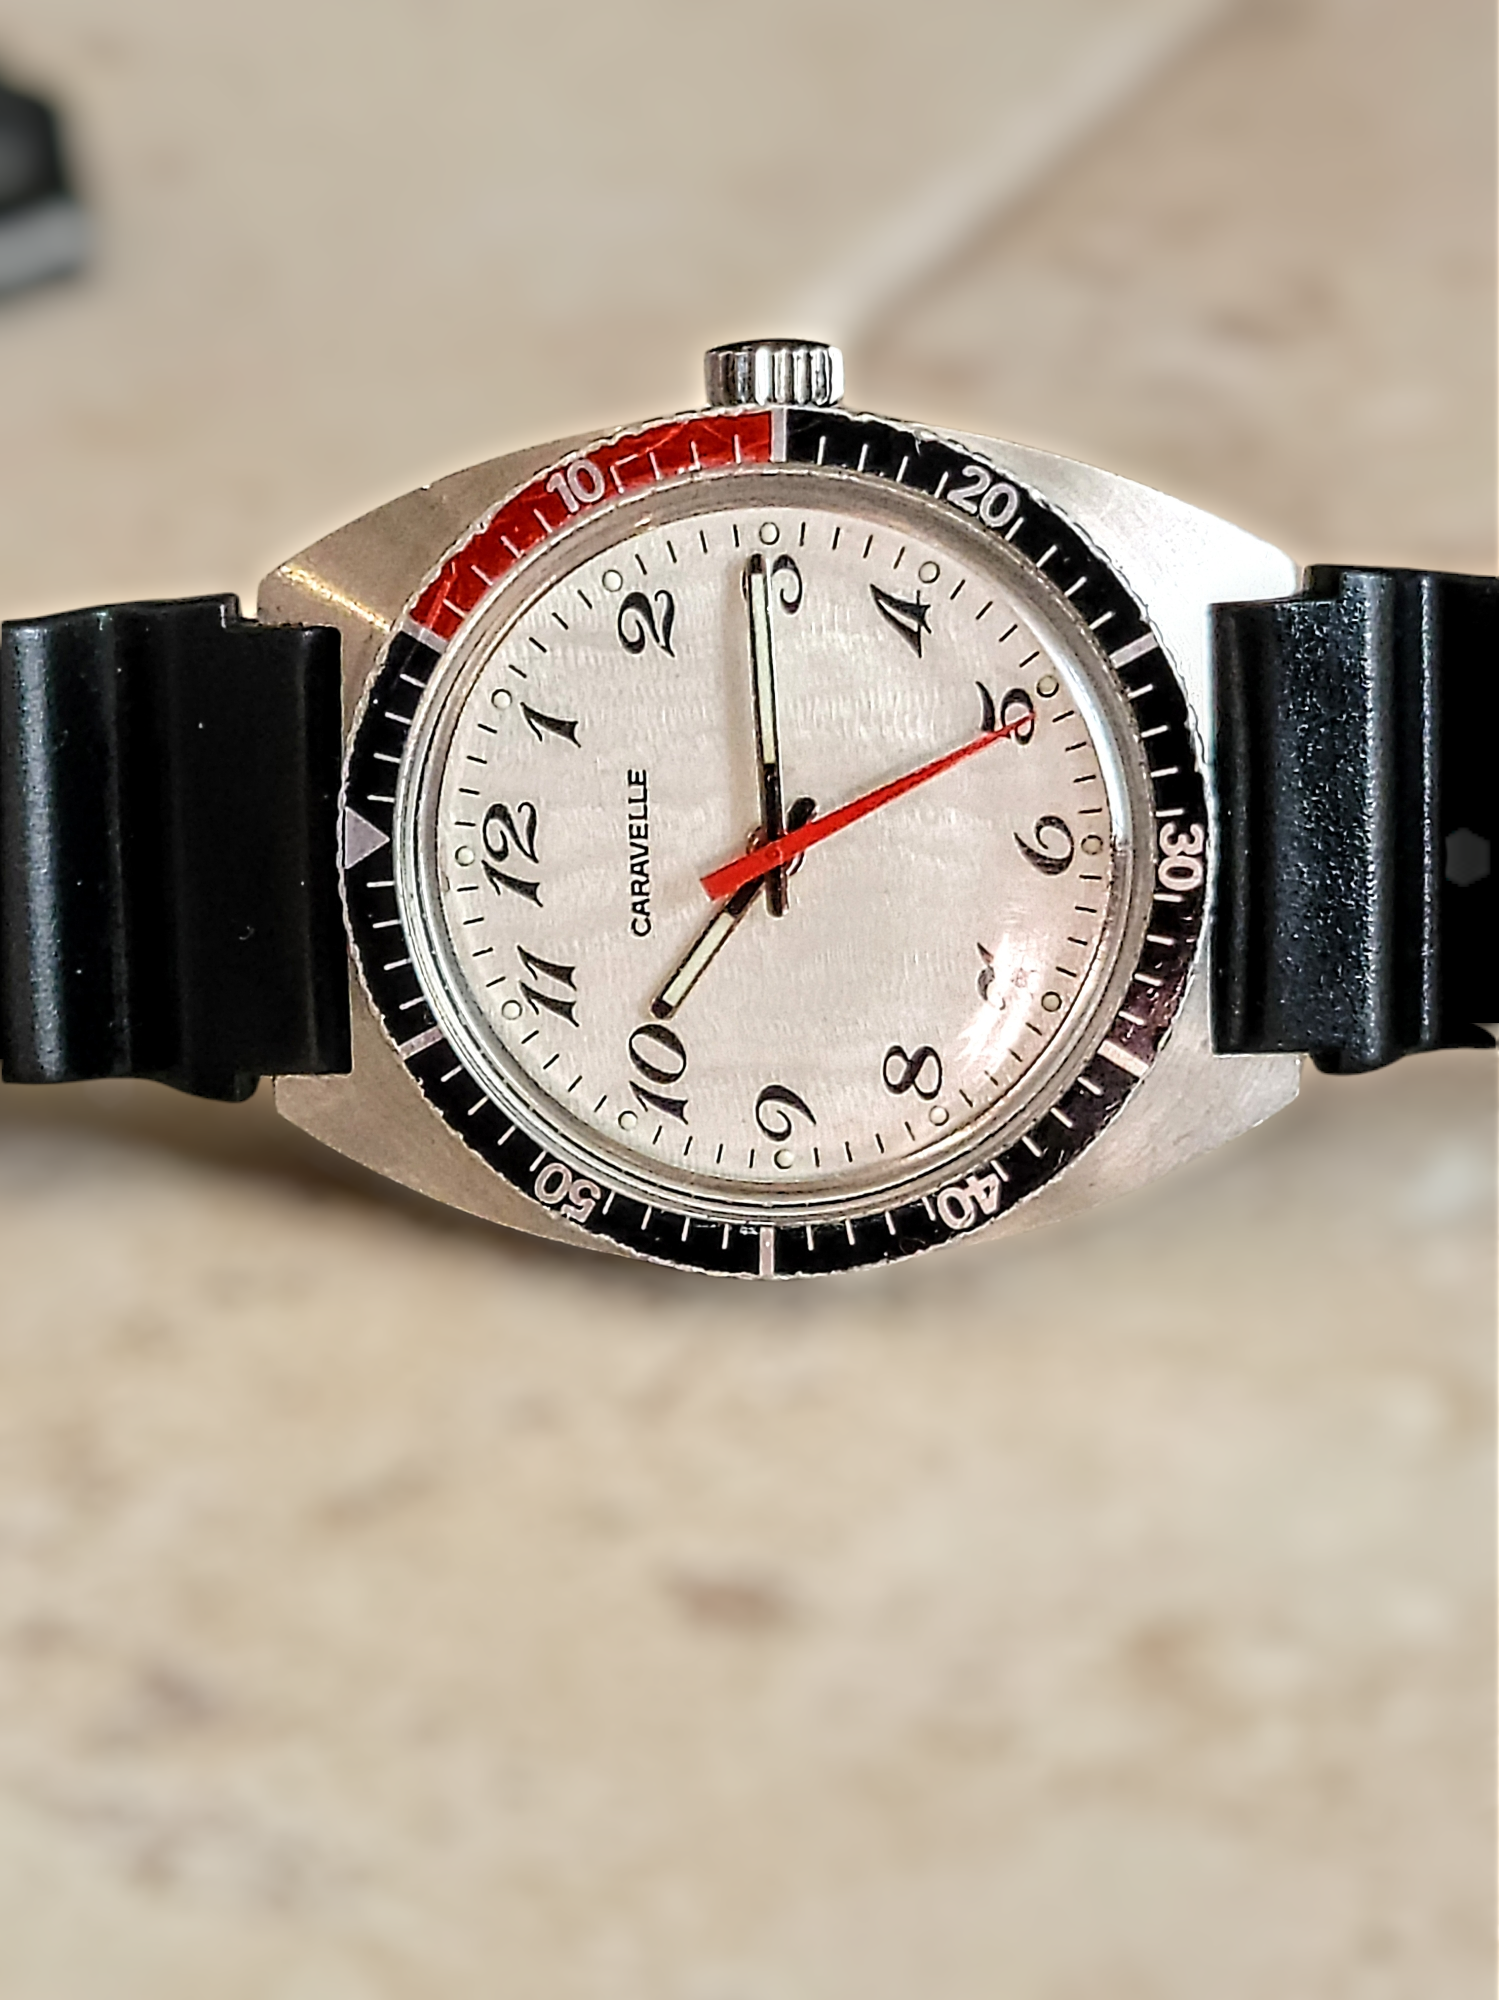 1977 CARAVELLE By Bulova Diver Watch Pepsi Bezel - All S. Steel